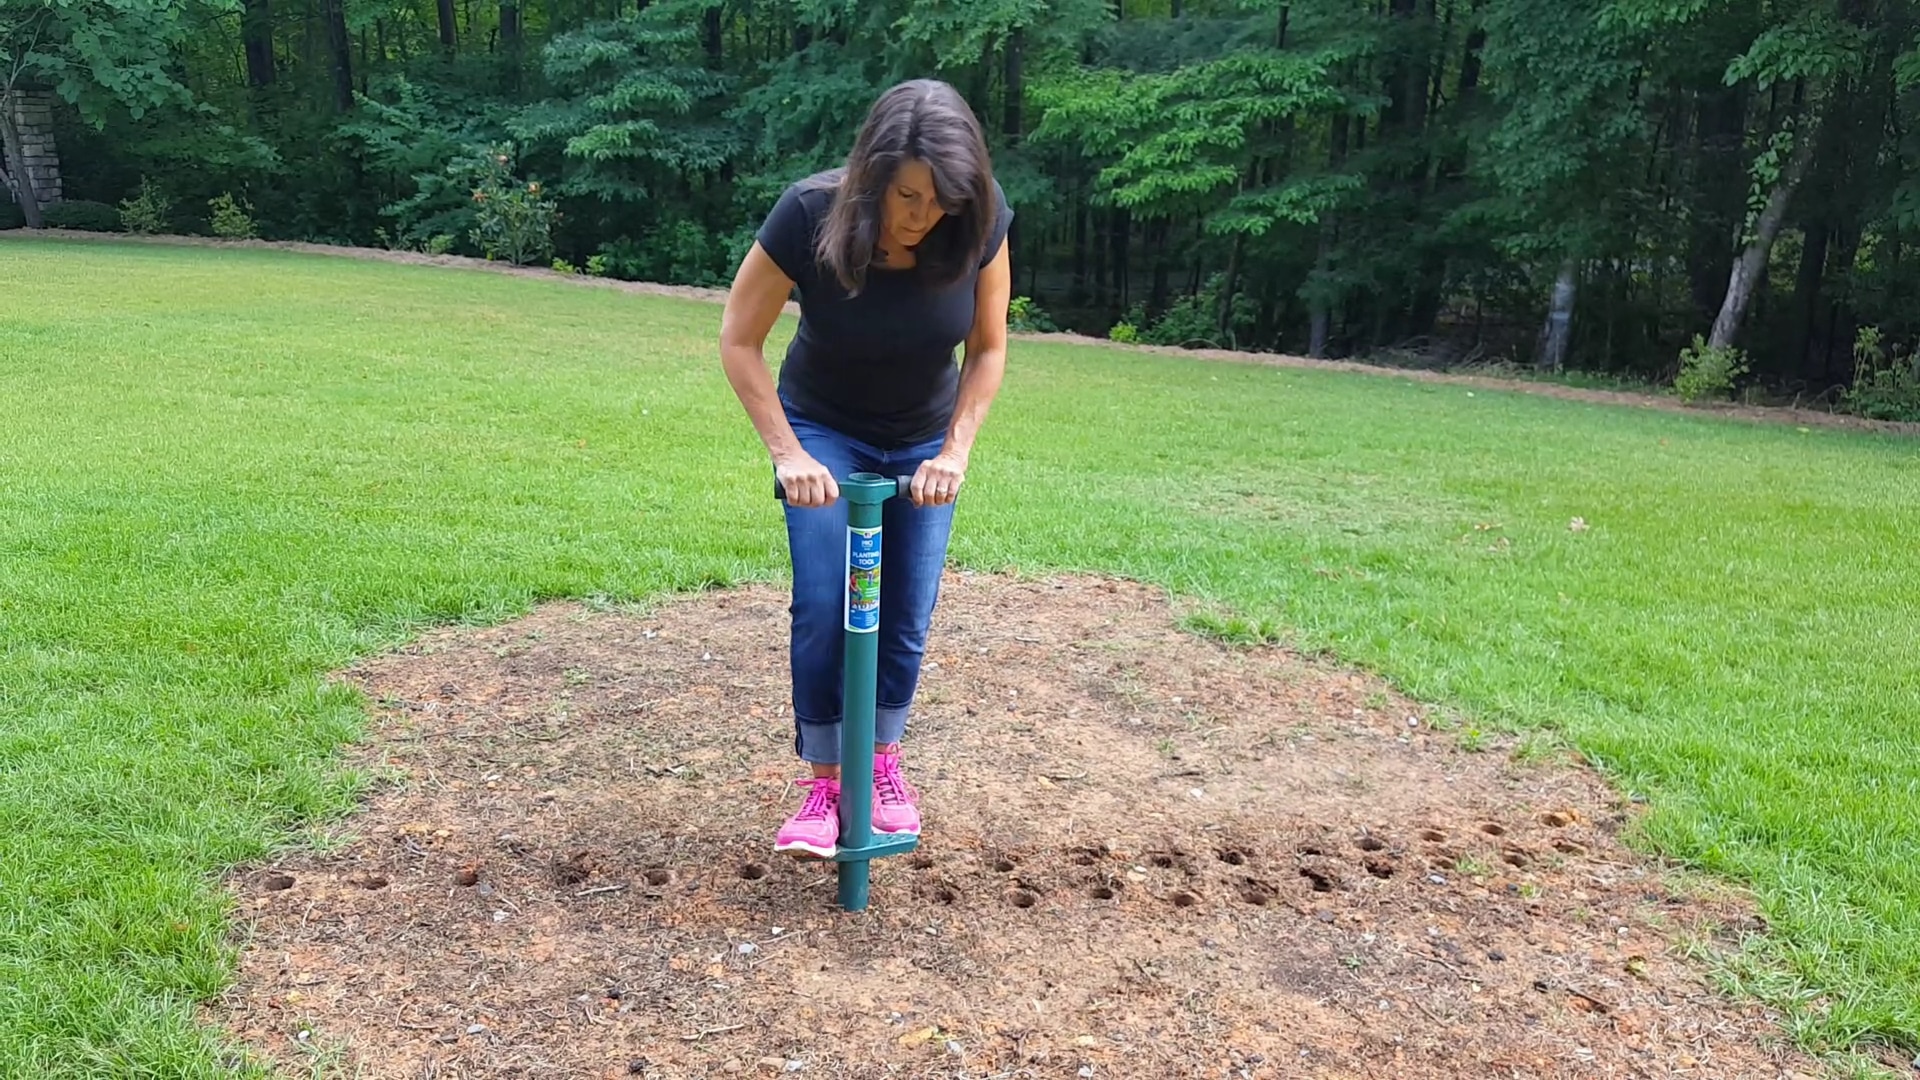 How To Fix A Lawn How To Repair Bare Spots in Your Lawn with the ProPluggger (with video) |  ProPlugger